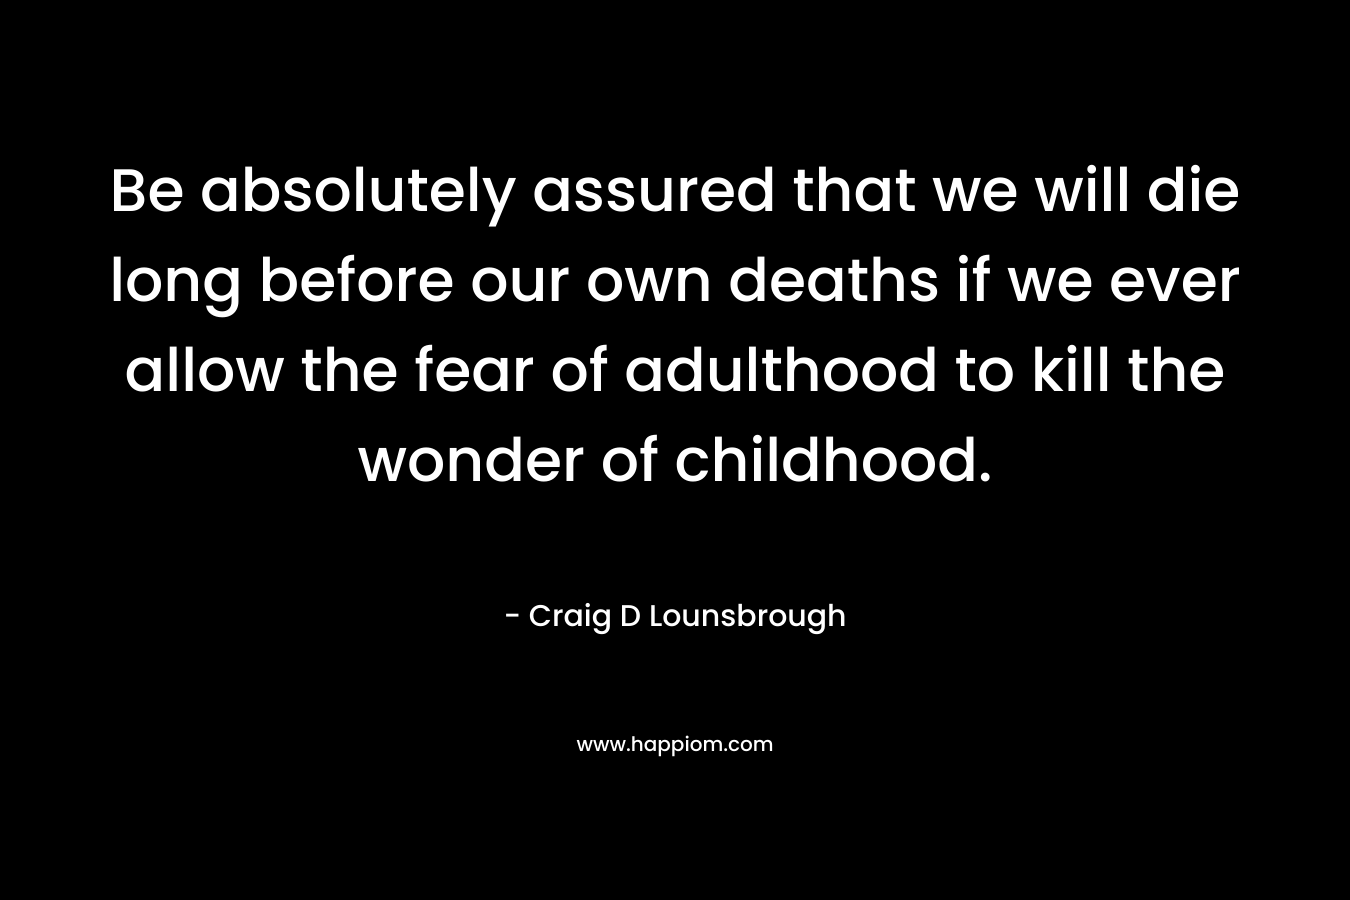 Be absolutely assured that we will die long before our own deaths if we ever allow the fear of adulthood to kill the wonder of childhood.